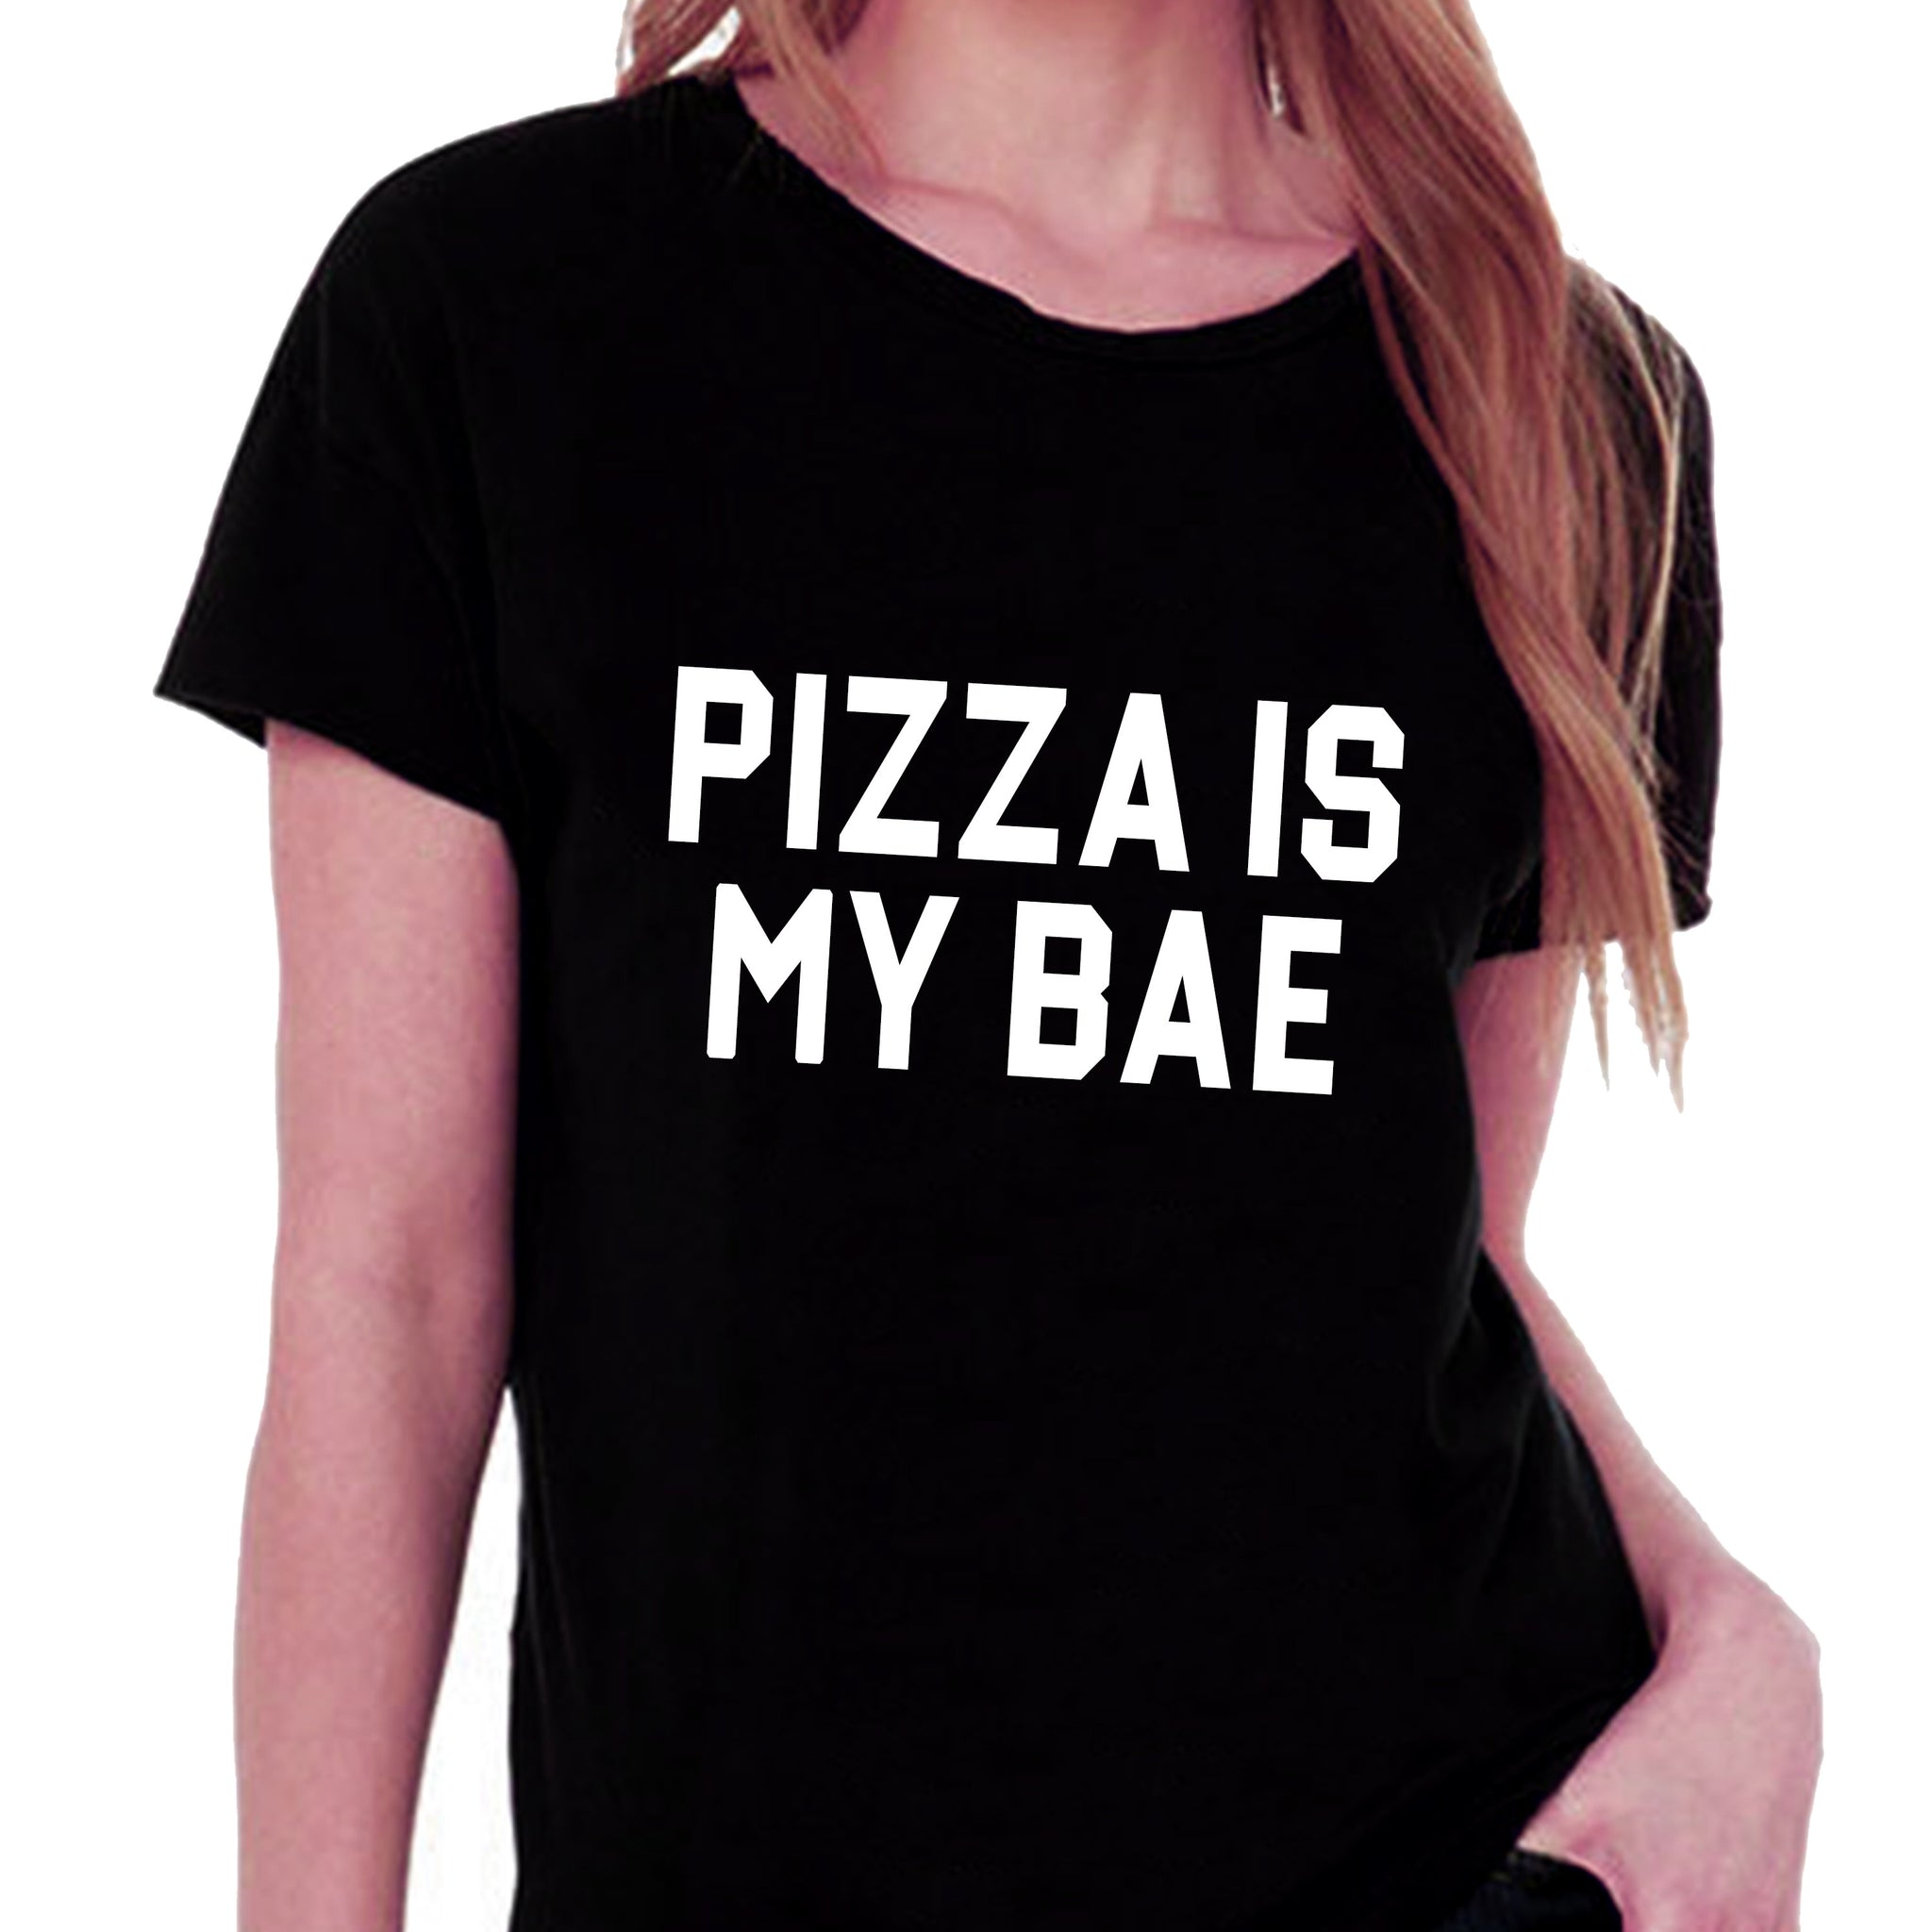 Pizza Is My Bae T-shirt for Women - Let's Beach